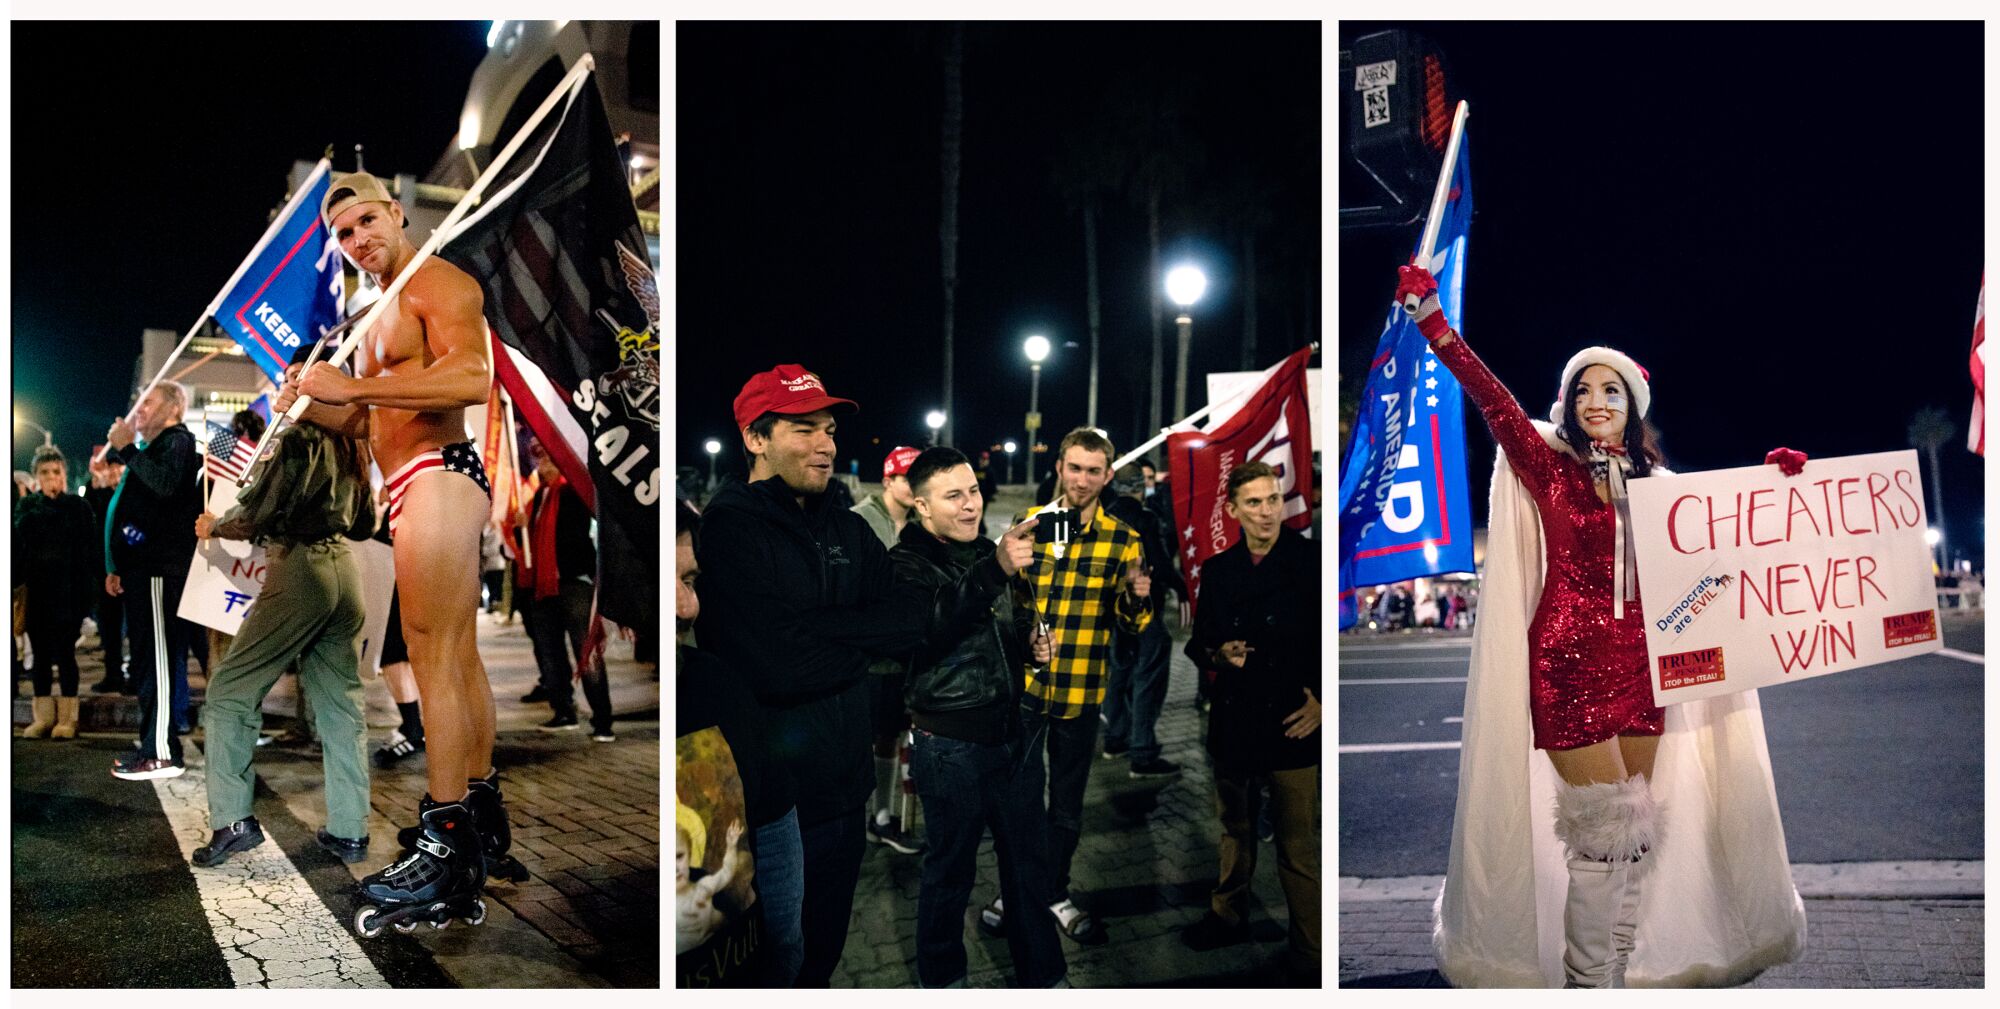 A triptych of people with pro-Trump and red white and blue flags and gear at a nighttime protest